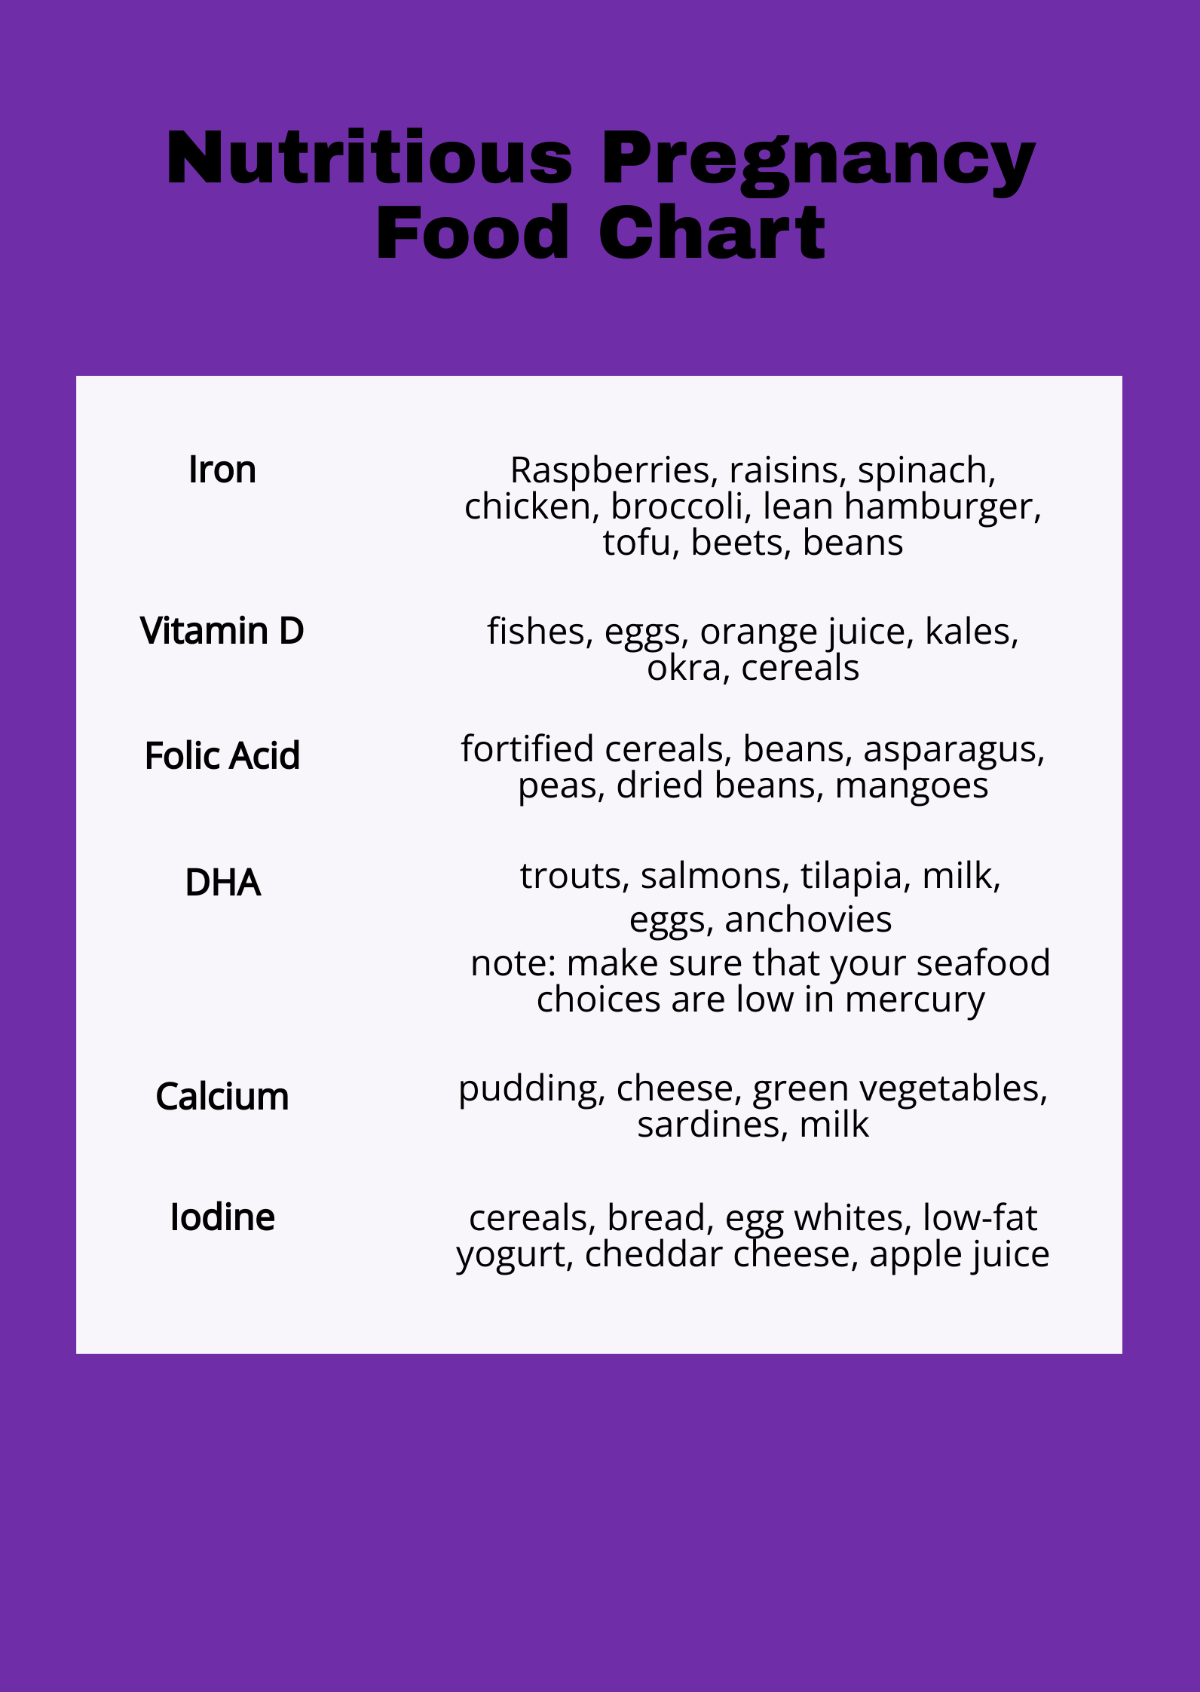 Nutritious Pregnancy Food Chart Template